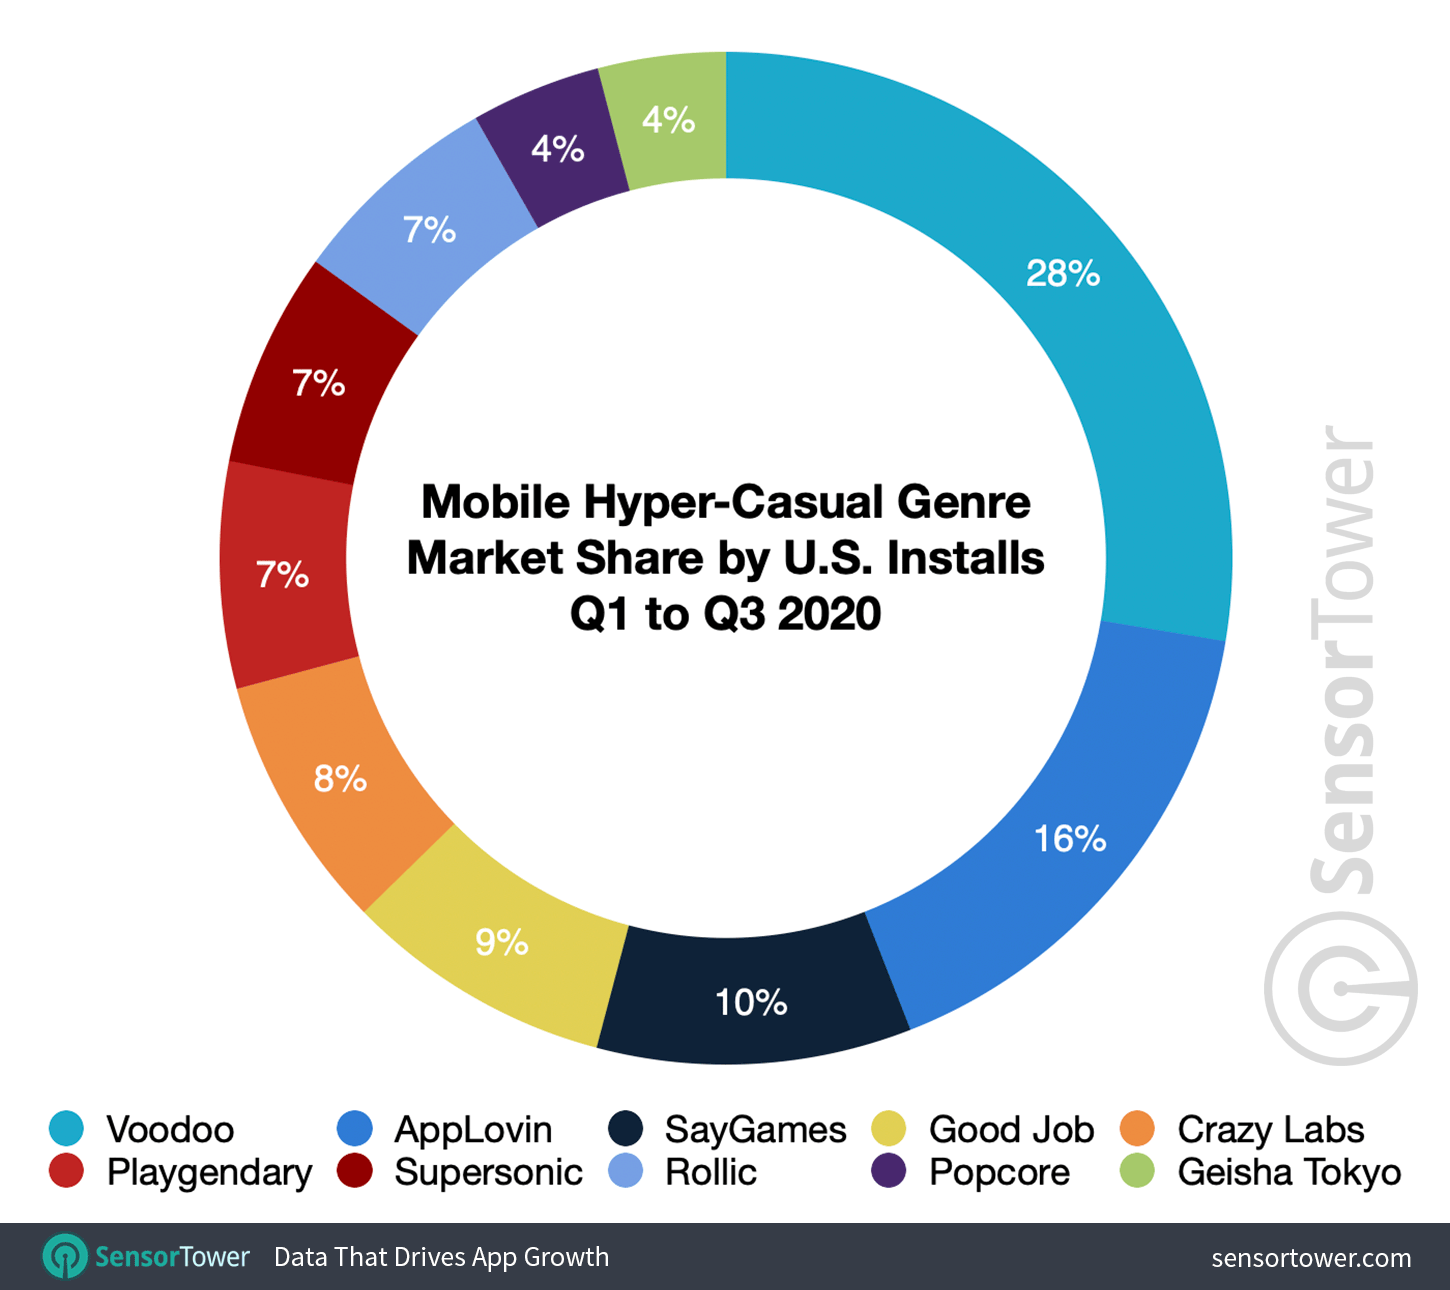 Mobile Hyper-Casual Genre Market Share by U.S. Downloads for Q1 to Q3 2020